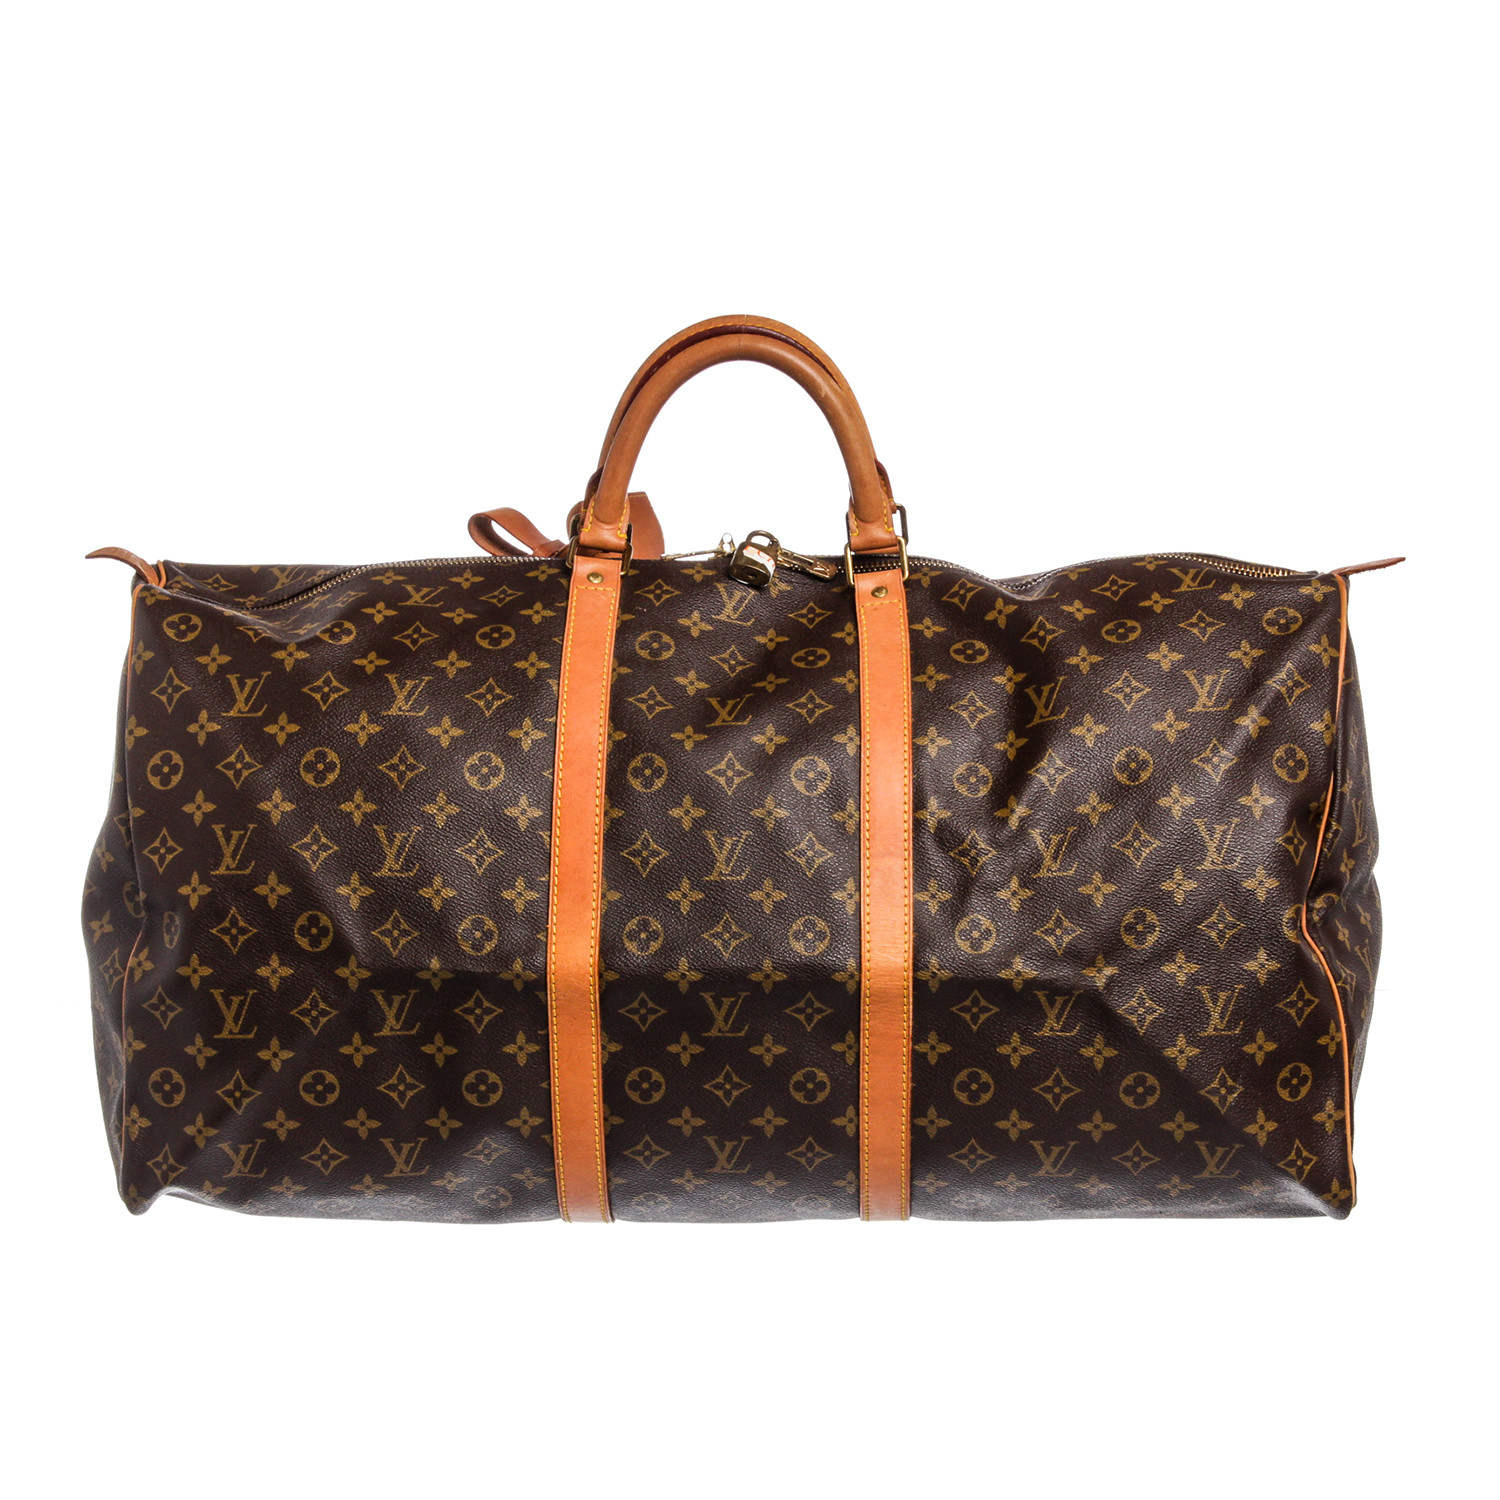 Monogram Canvas Leather Keepall 50 cm Duffle Bag Luggage // Pre-Owned // MI8902 - Pre-Owned ...